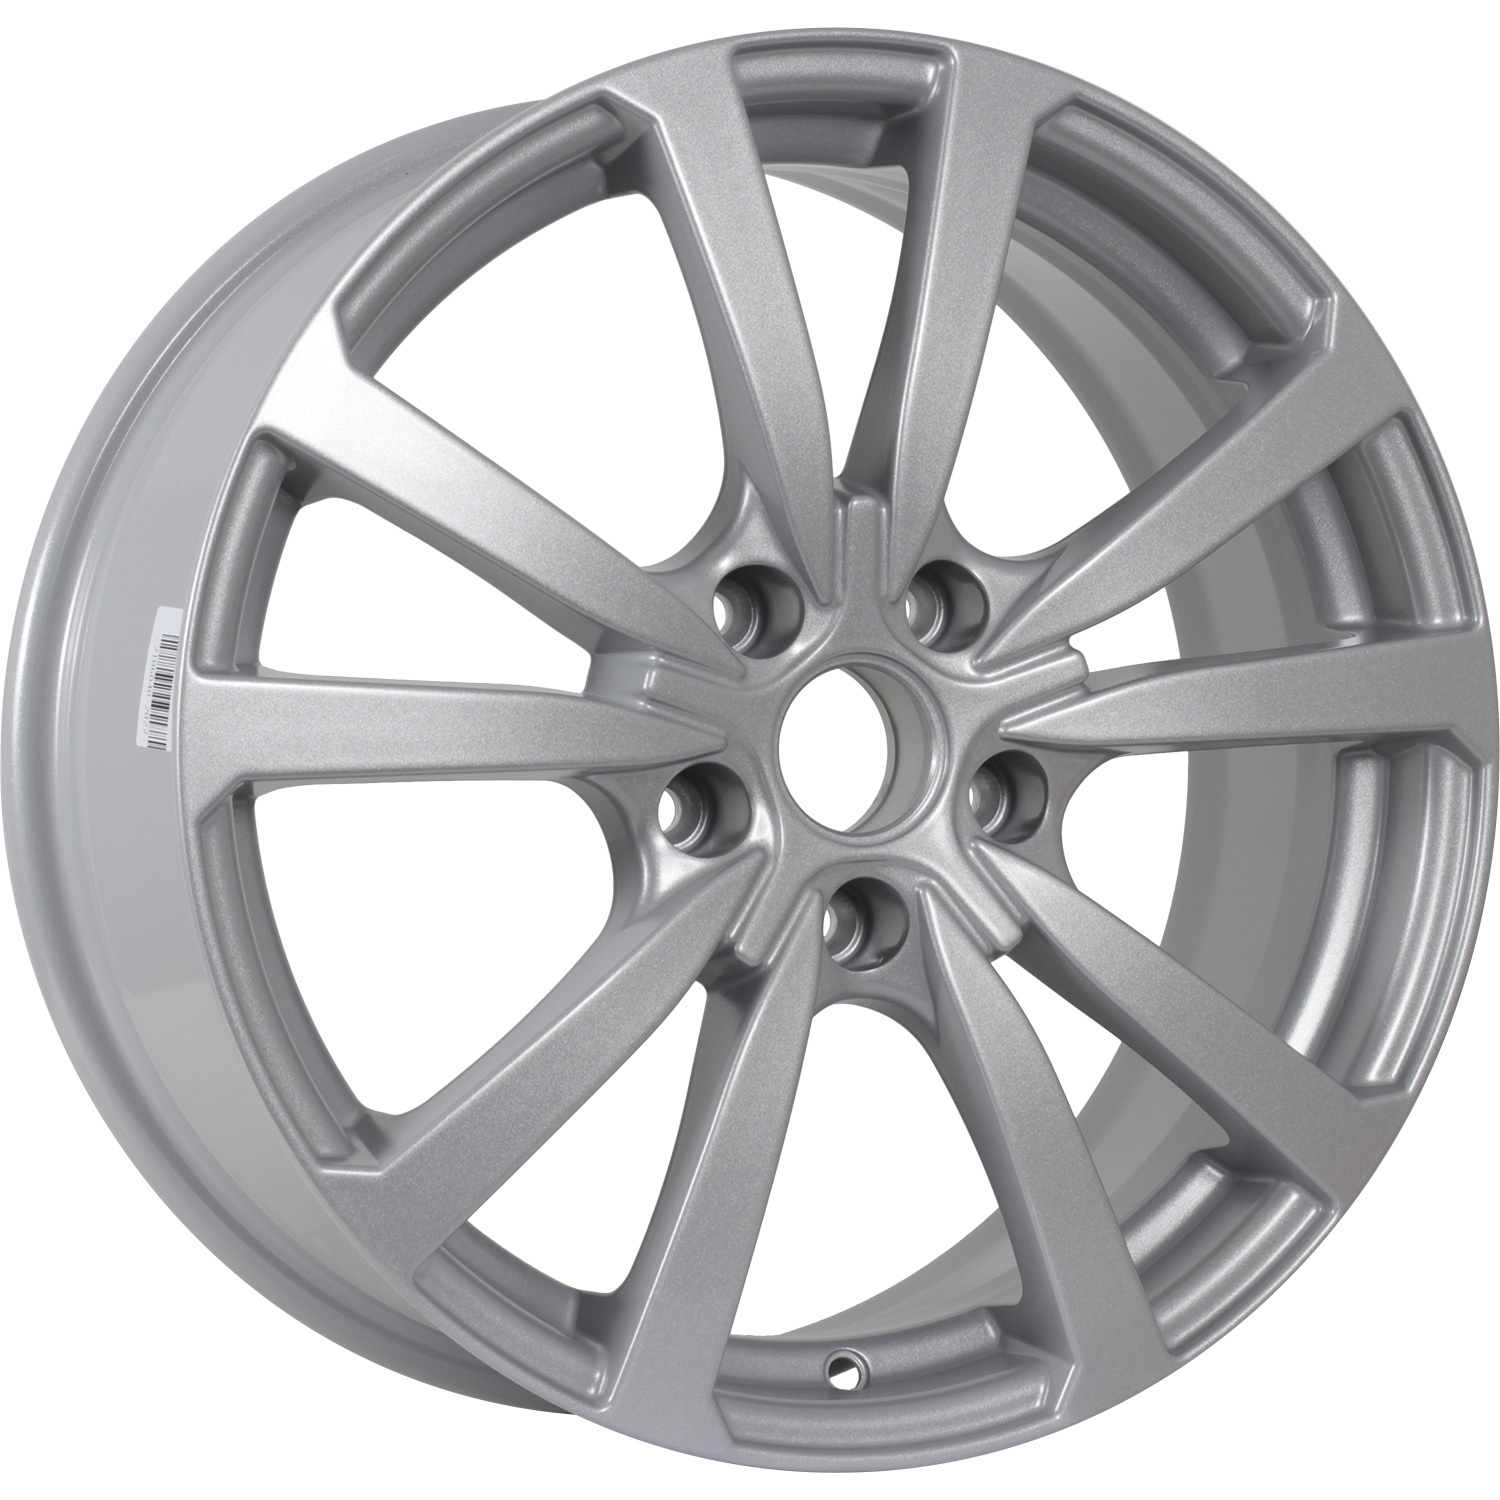 ifree бэнкс 7x17 5x100 d67 1 et45 neo classic Колесный диск iFree Бэнкс 7x17/5x114.3 D60.1 ET39 Neo_classic